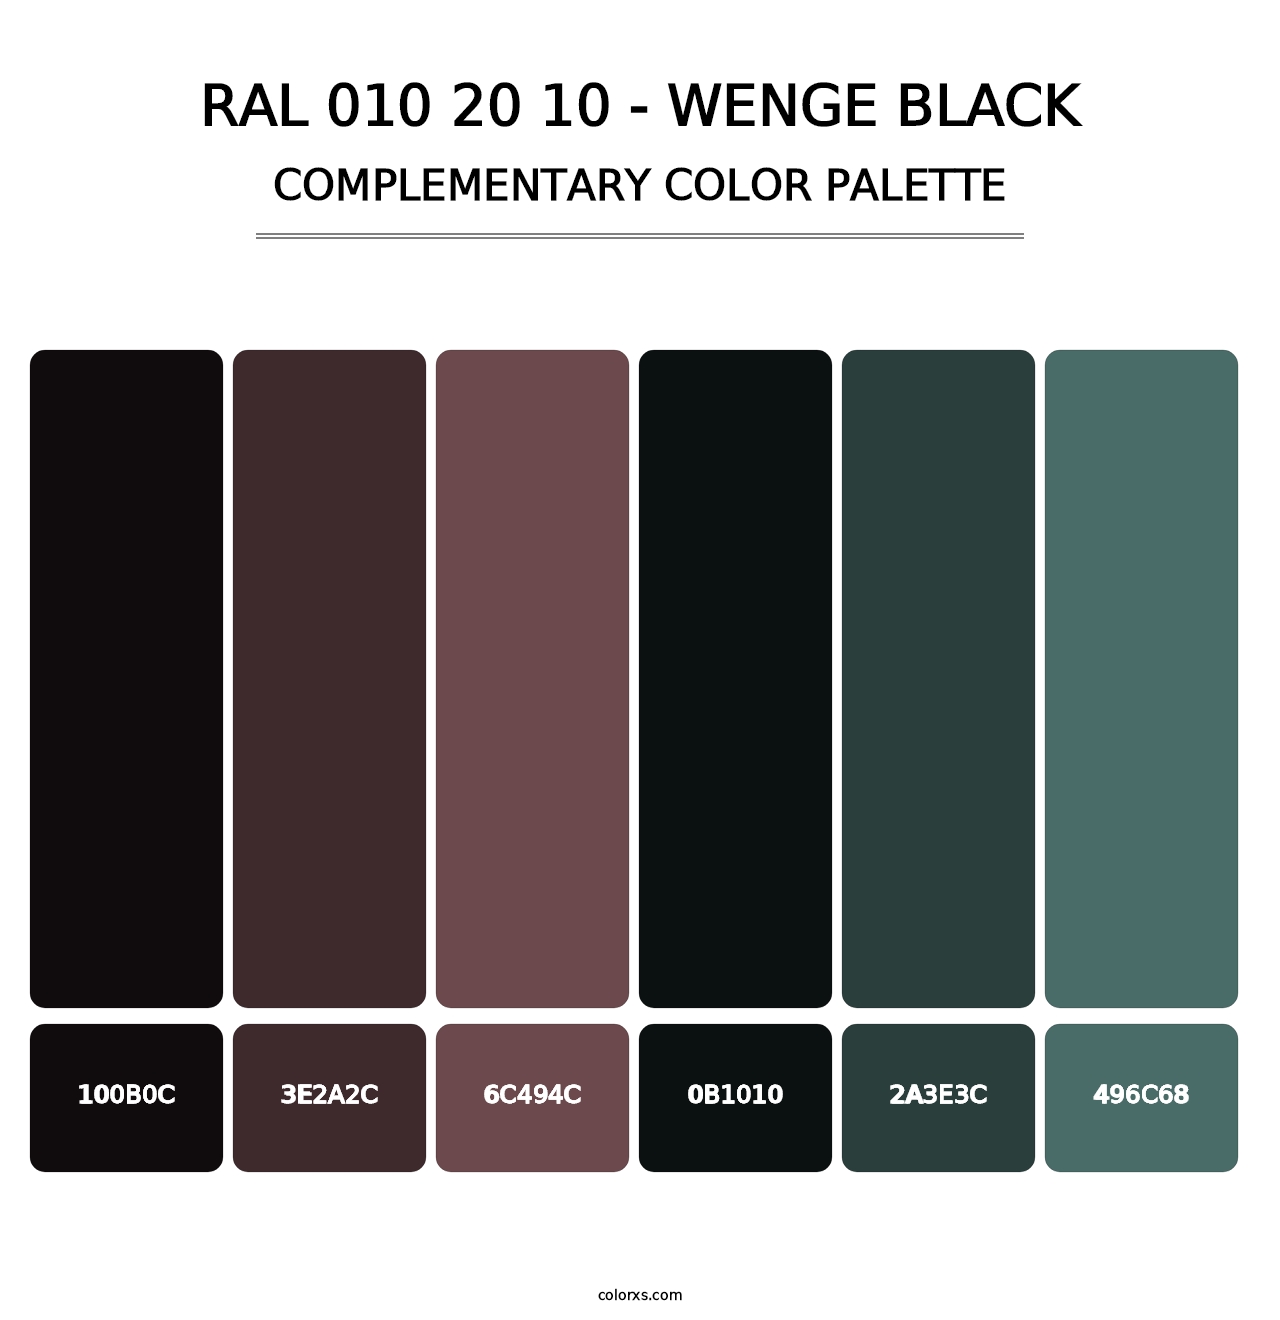 RAL 010 20 10 - Wenge Black - Complementary Color Palette